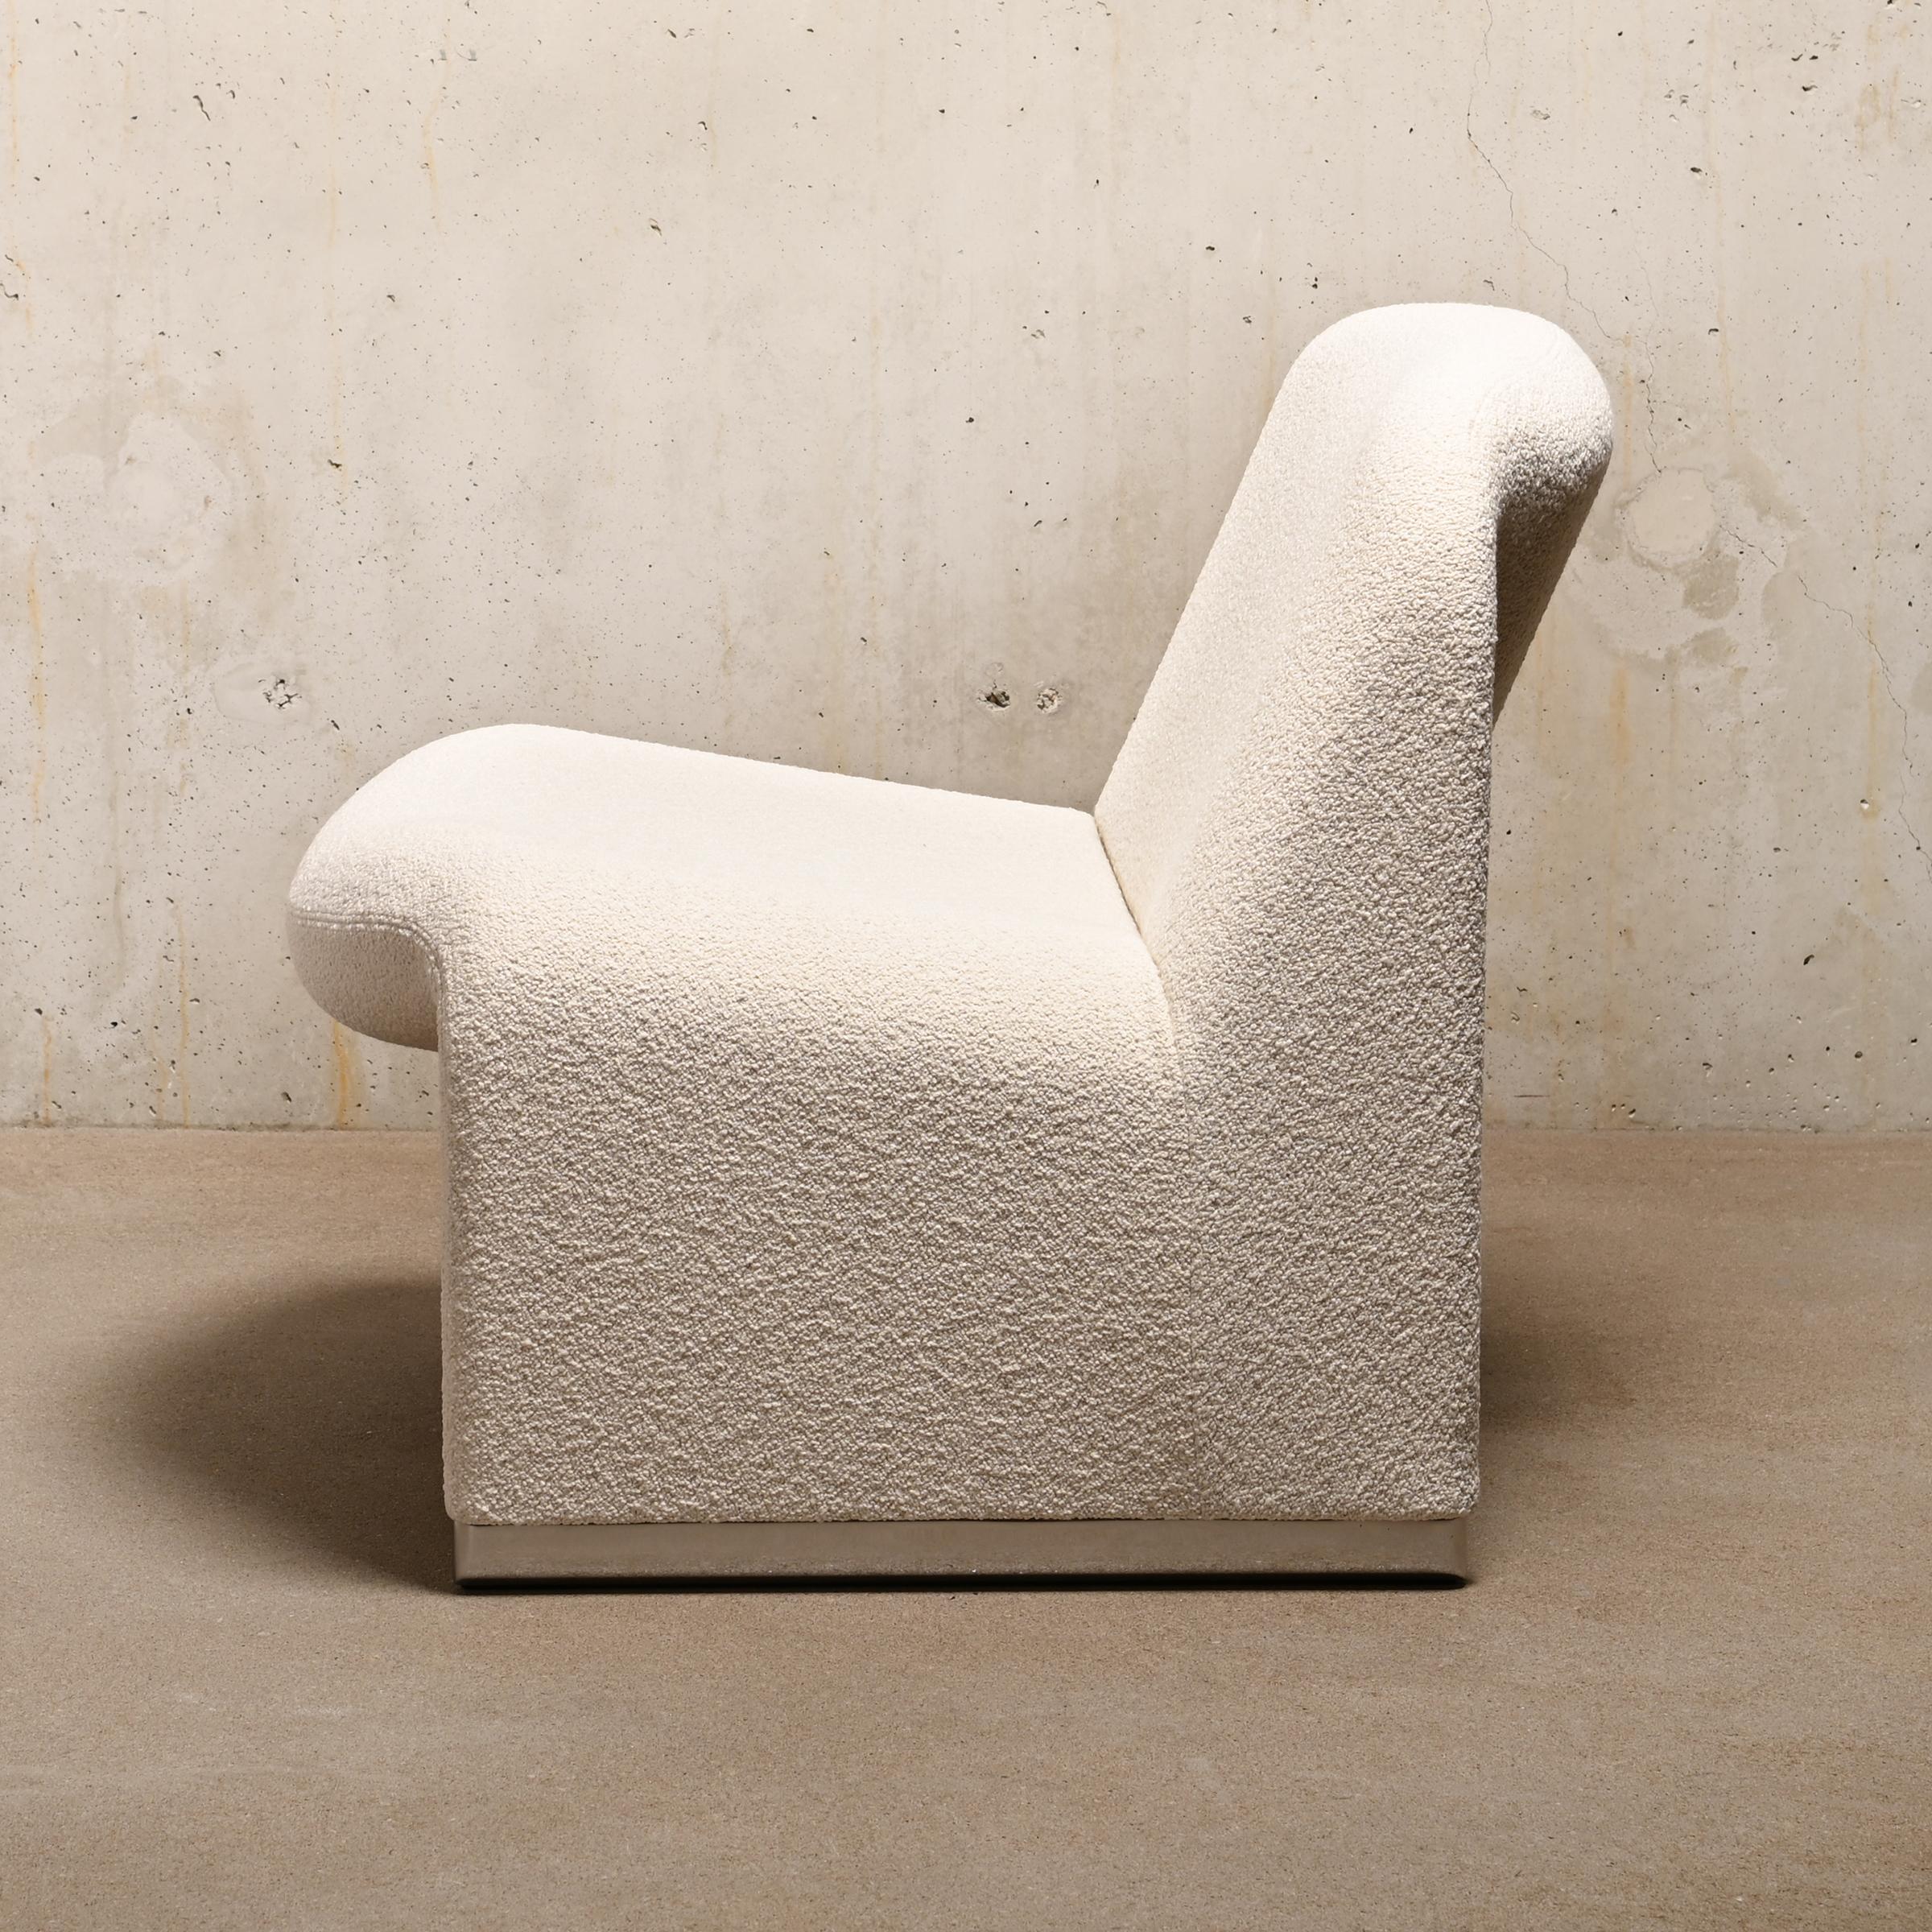 Mid-Century Modern Giancarlo Piretti Alky Lounge Chair in White Bouclé Fabric for Anonima Castelli For Sale